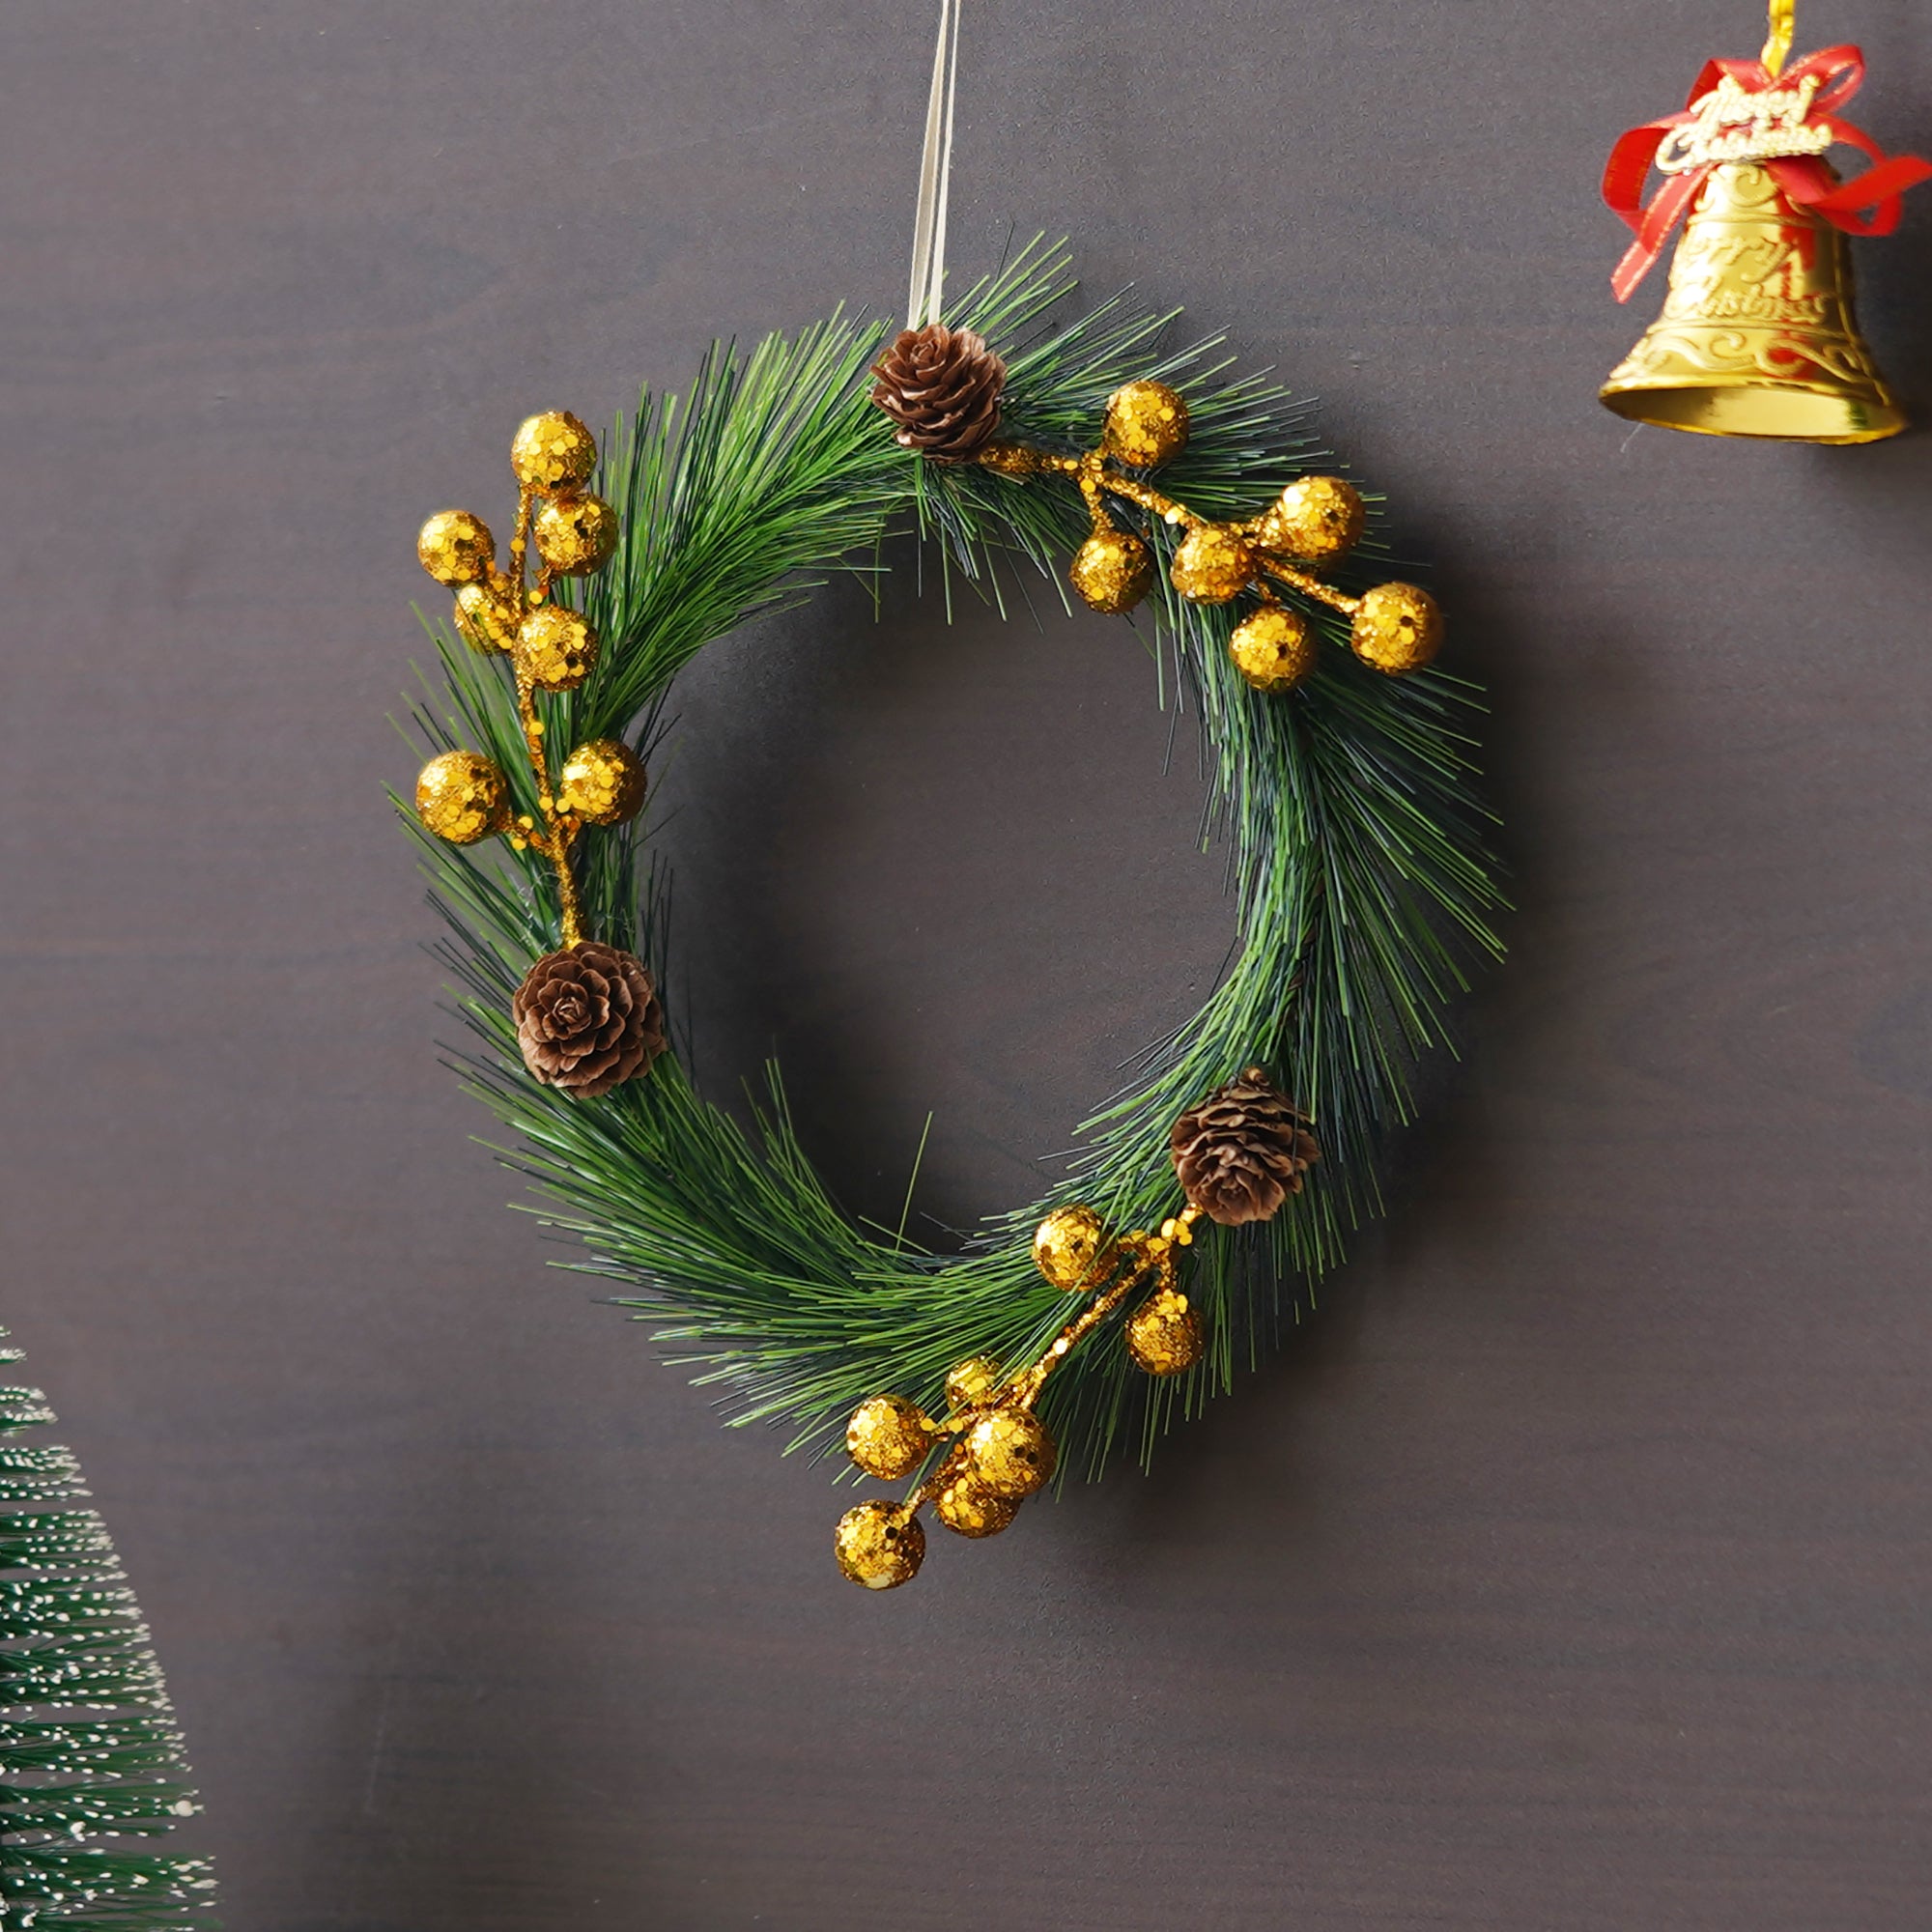 eCraftIndia Green Christmas Wreath with Gold Balls and Flowers Decorative Ornaments 5